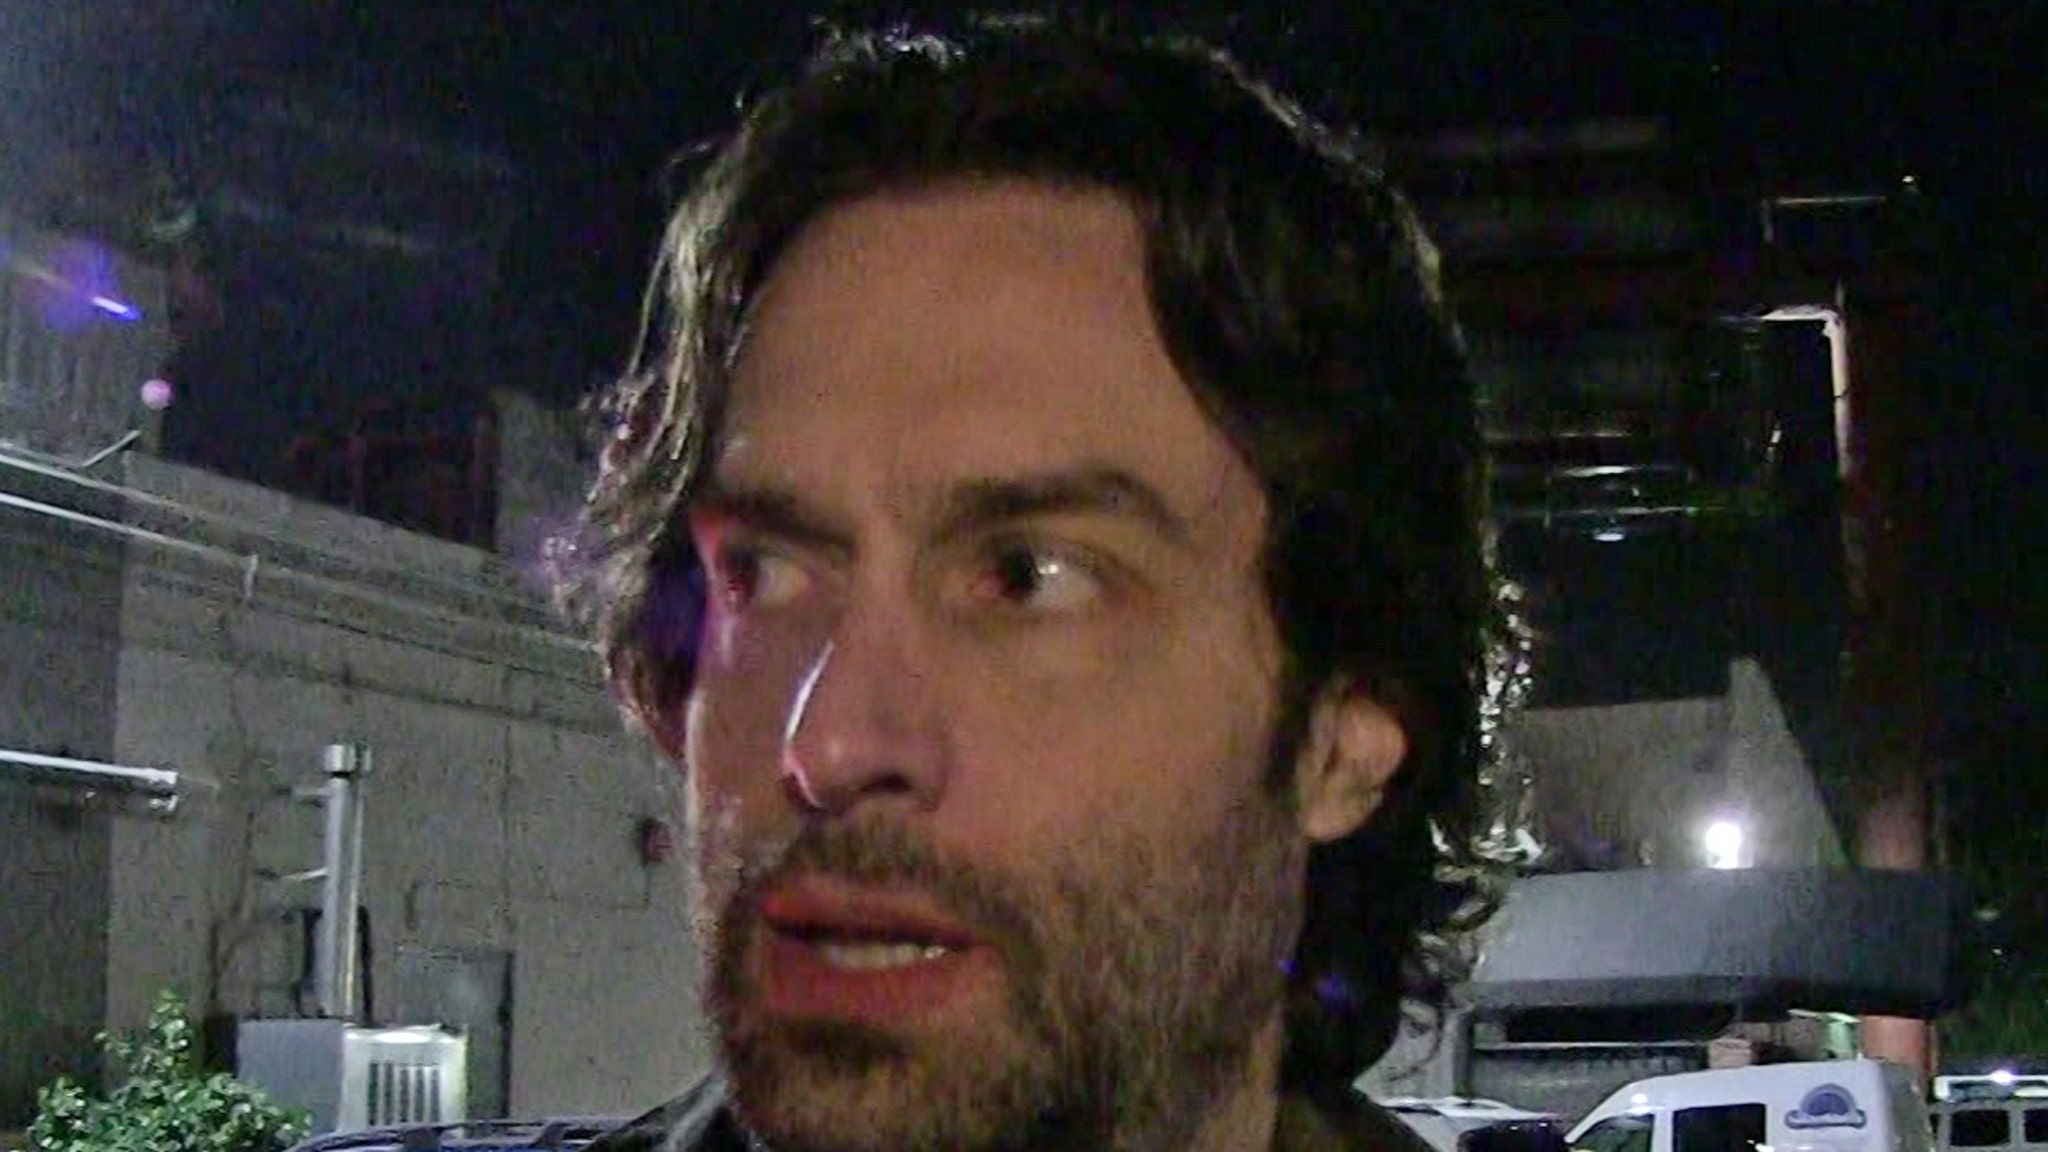 Chris D’Elia sued by woman who claims he had sex with her when she was 17